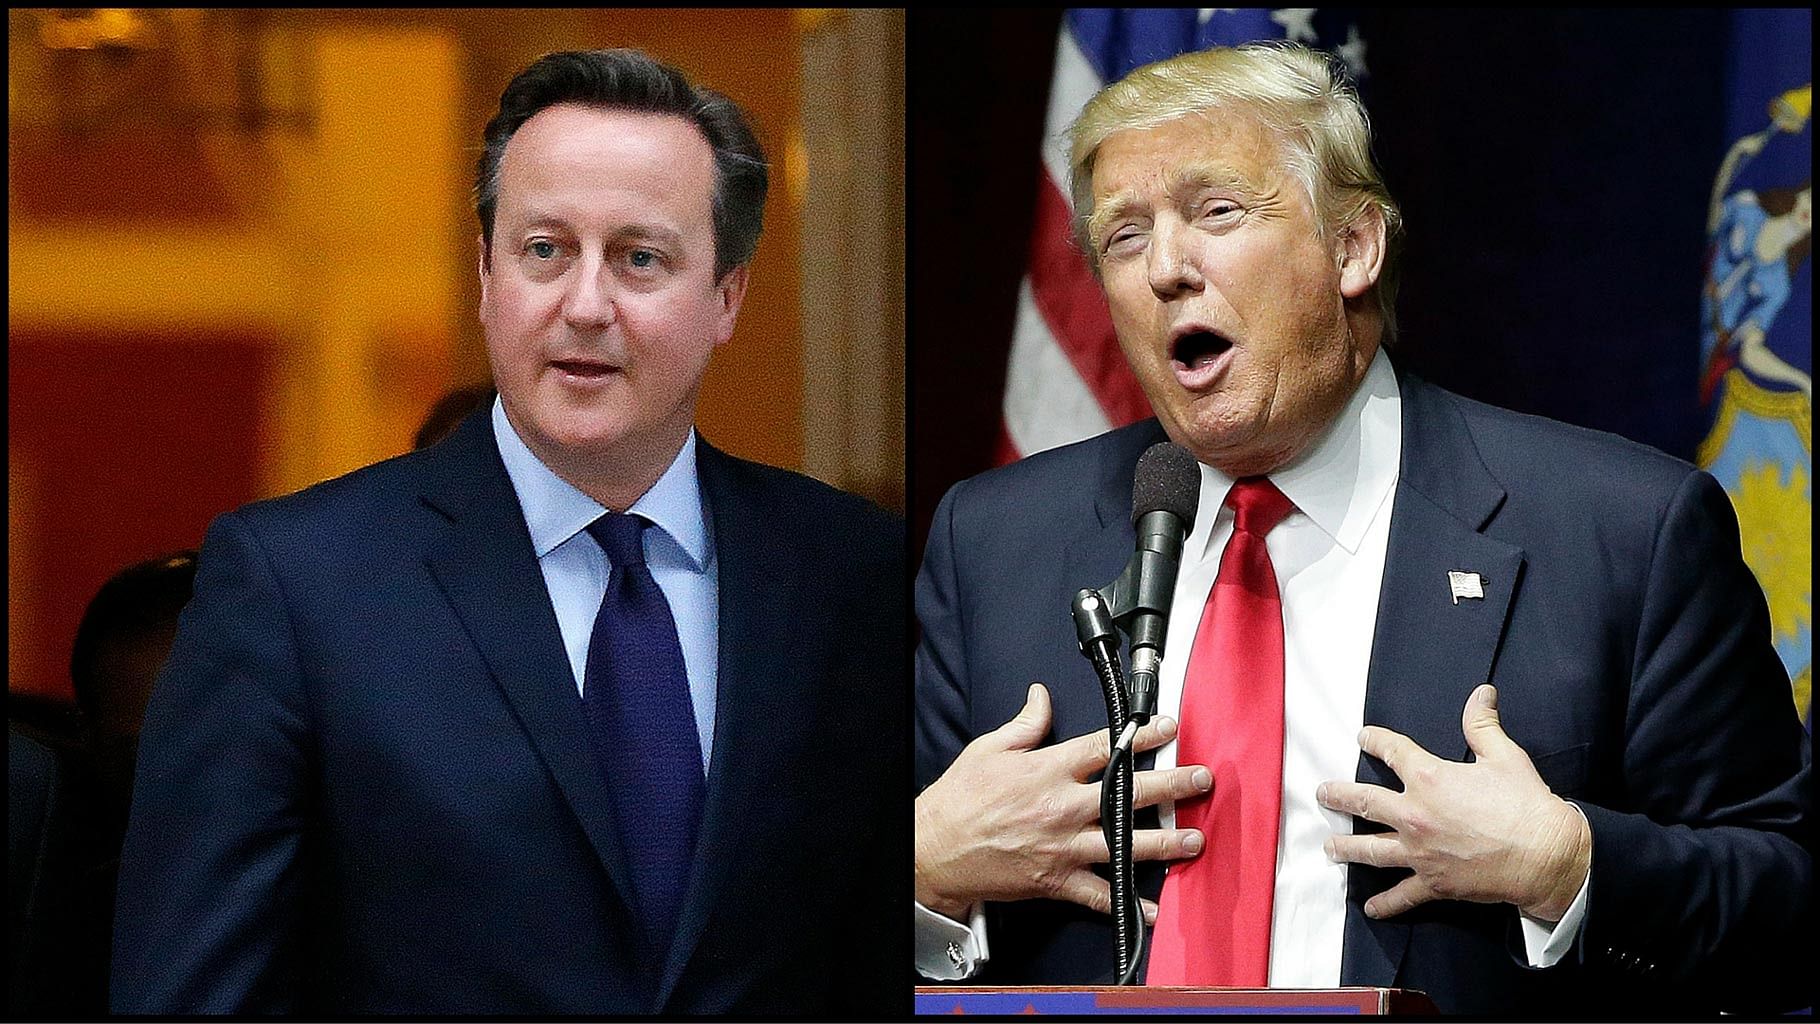 Prime Minister of United Kingdom, David Cameron and US Presidential candidate Donald Trump. (Photo: <b>The Quint</b>)